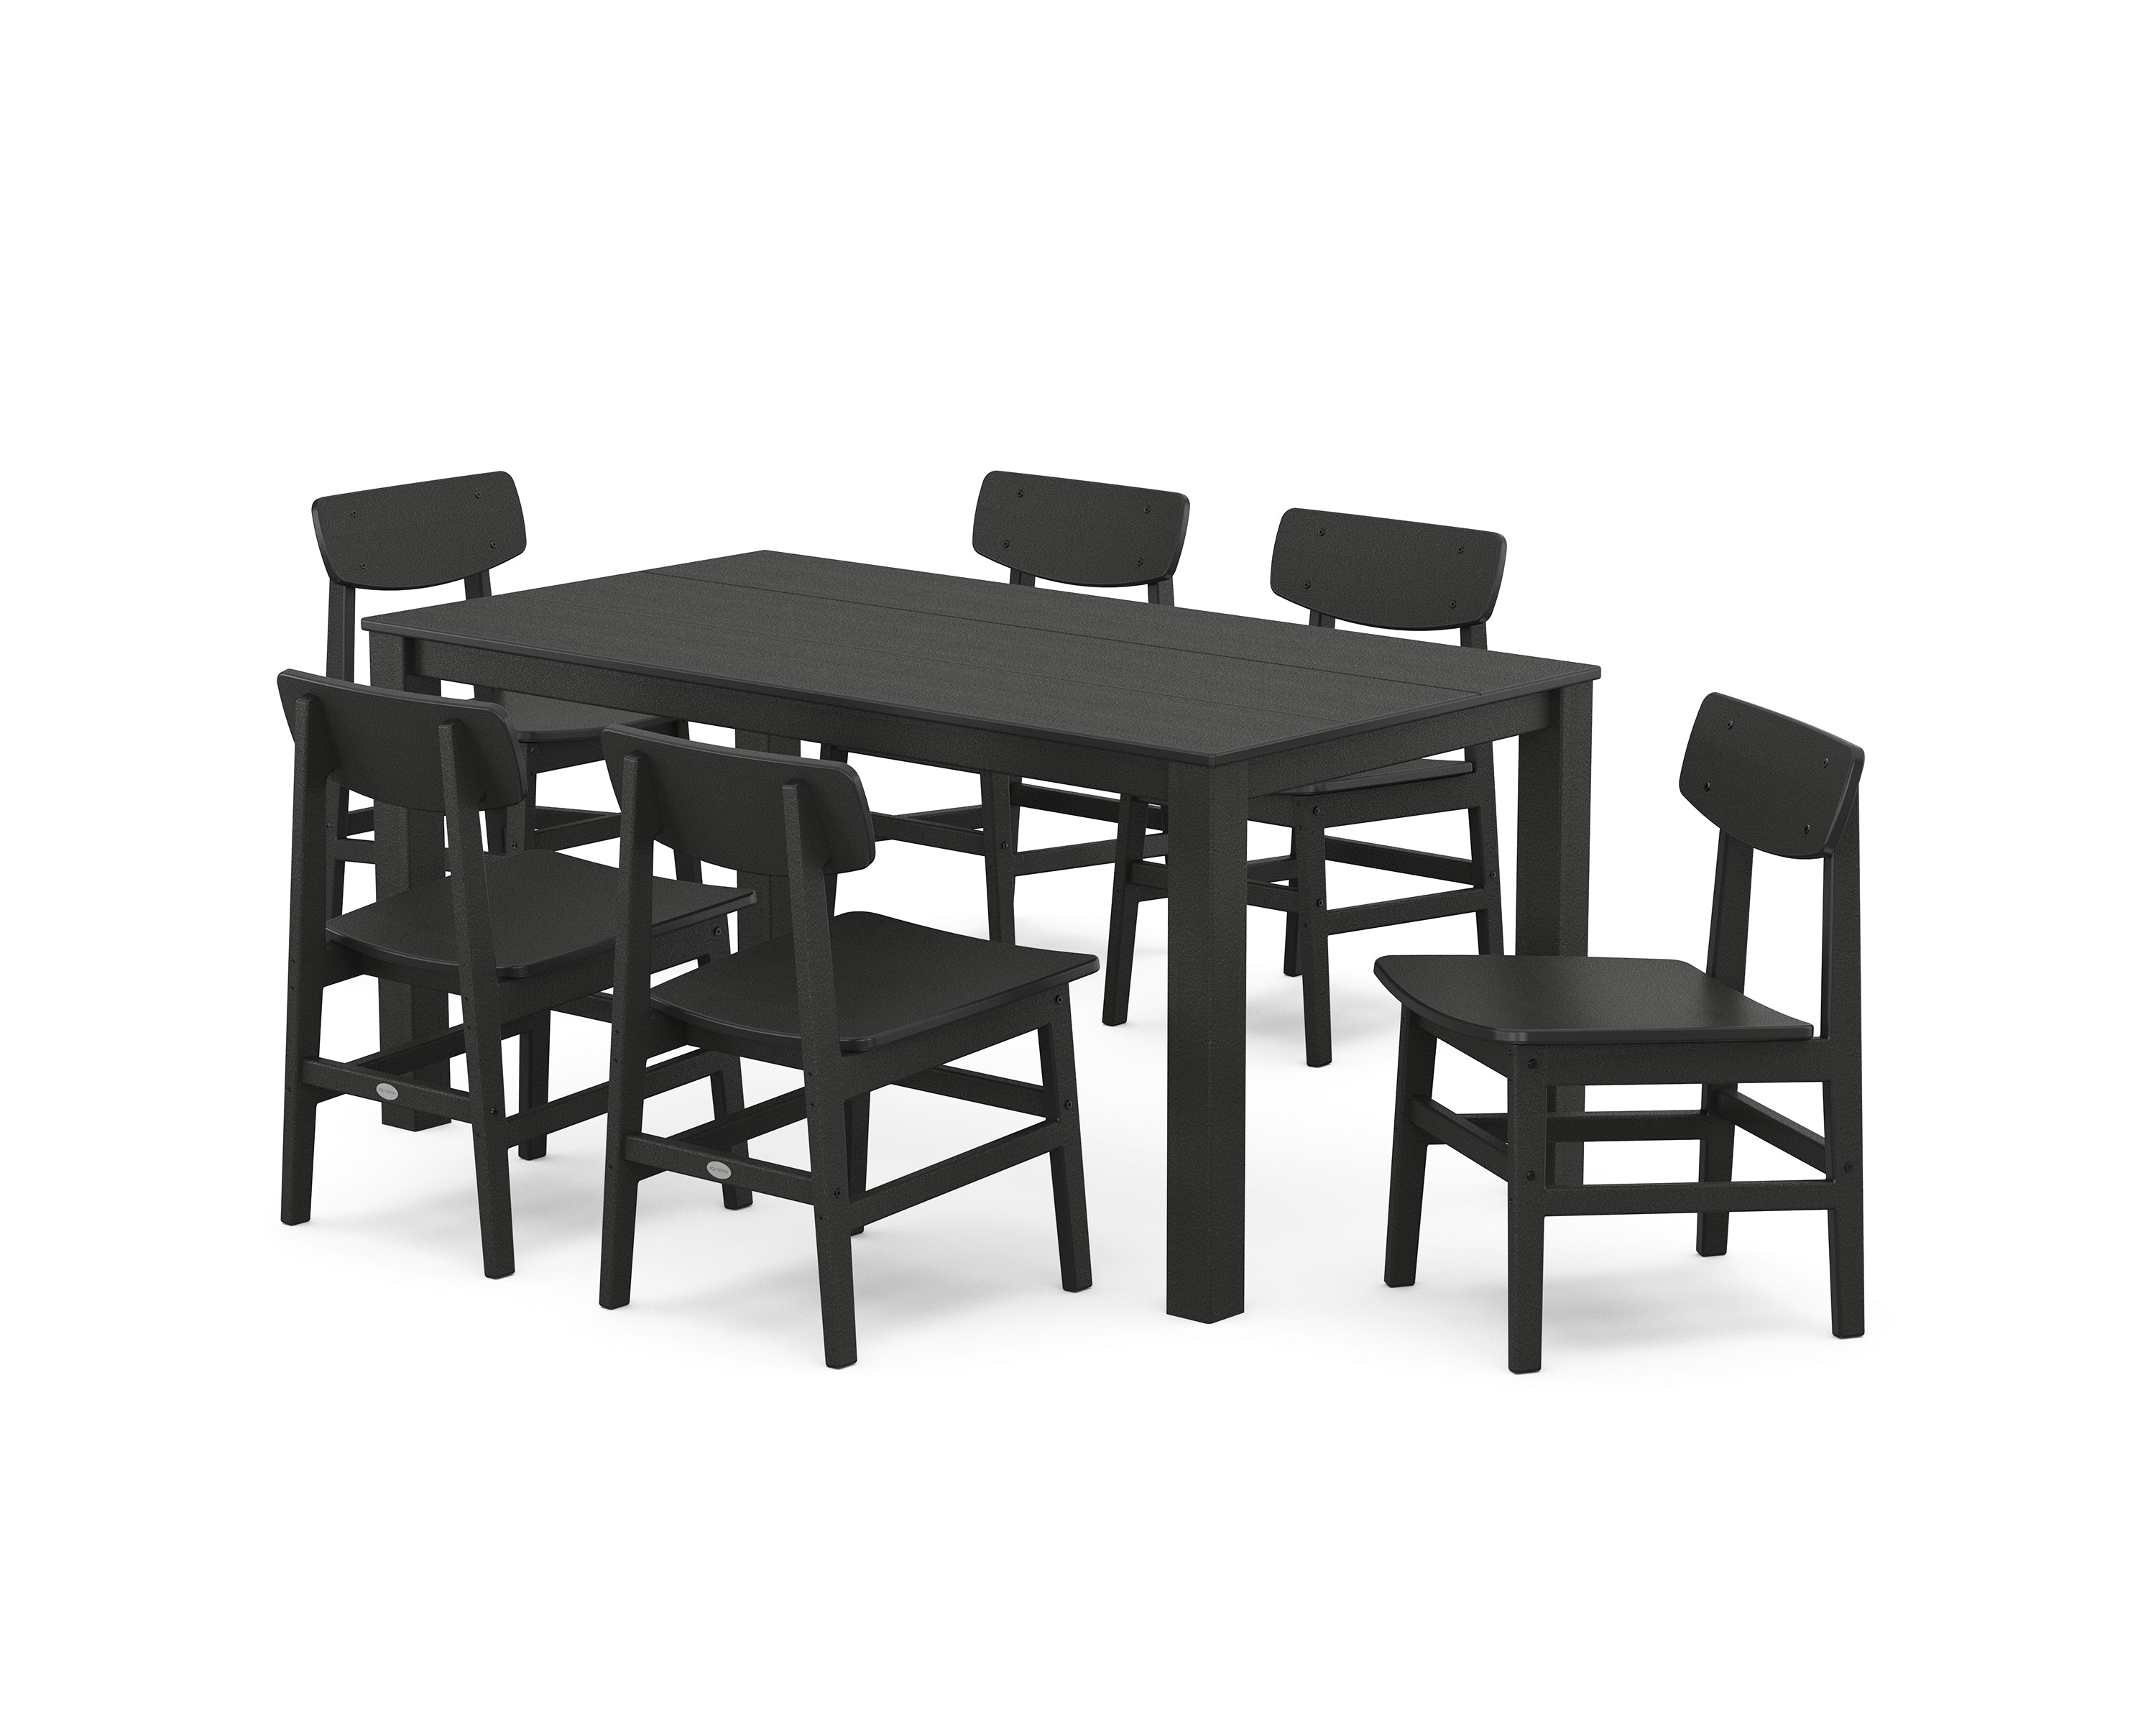 POLYWOOD® Modern Studio Urban Chair 7-Piece Parsons Table Dining Set in Black